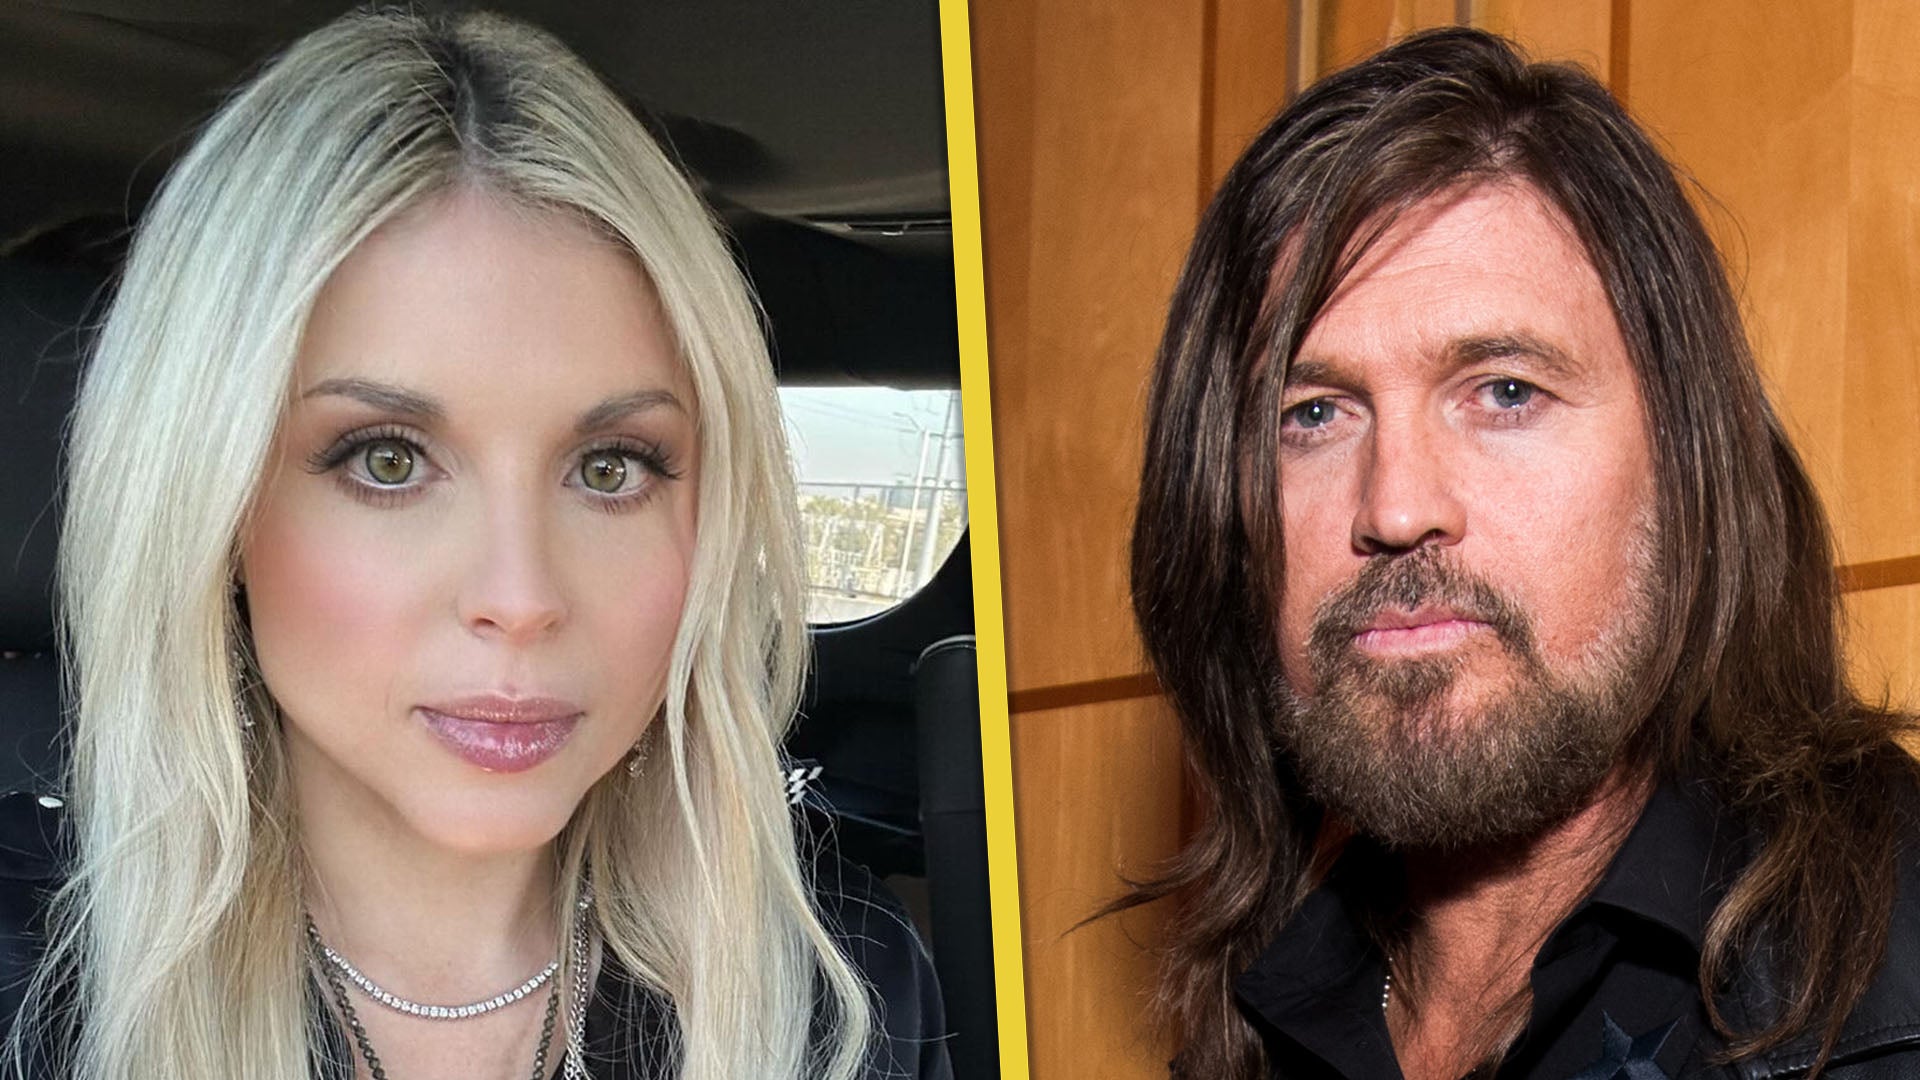 Billy Ray Cyrus Says He Was 'At Wit's End' in Leaked Audio Fight With Ex Firerose